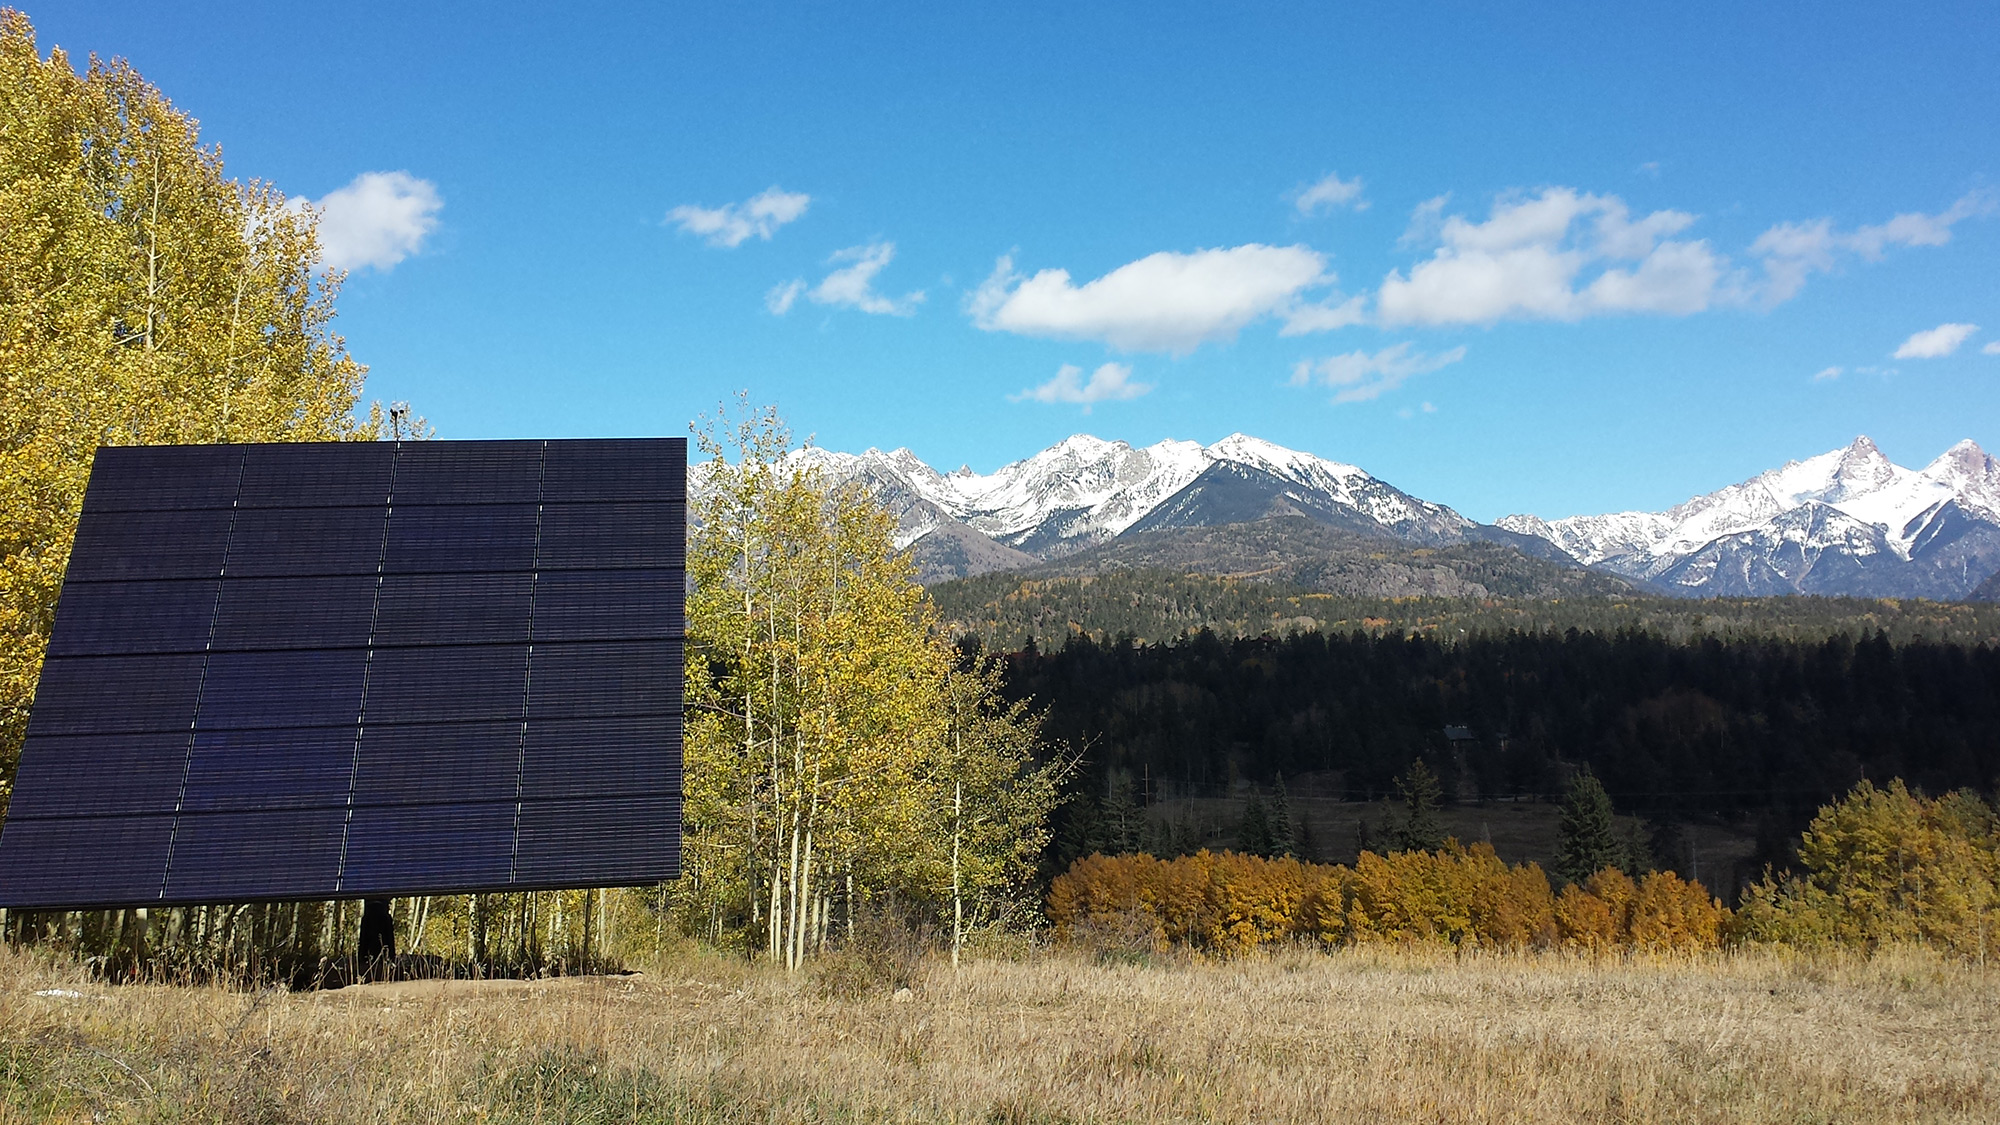 Solar panel with snowcapped mountains in the background.